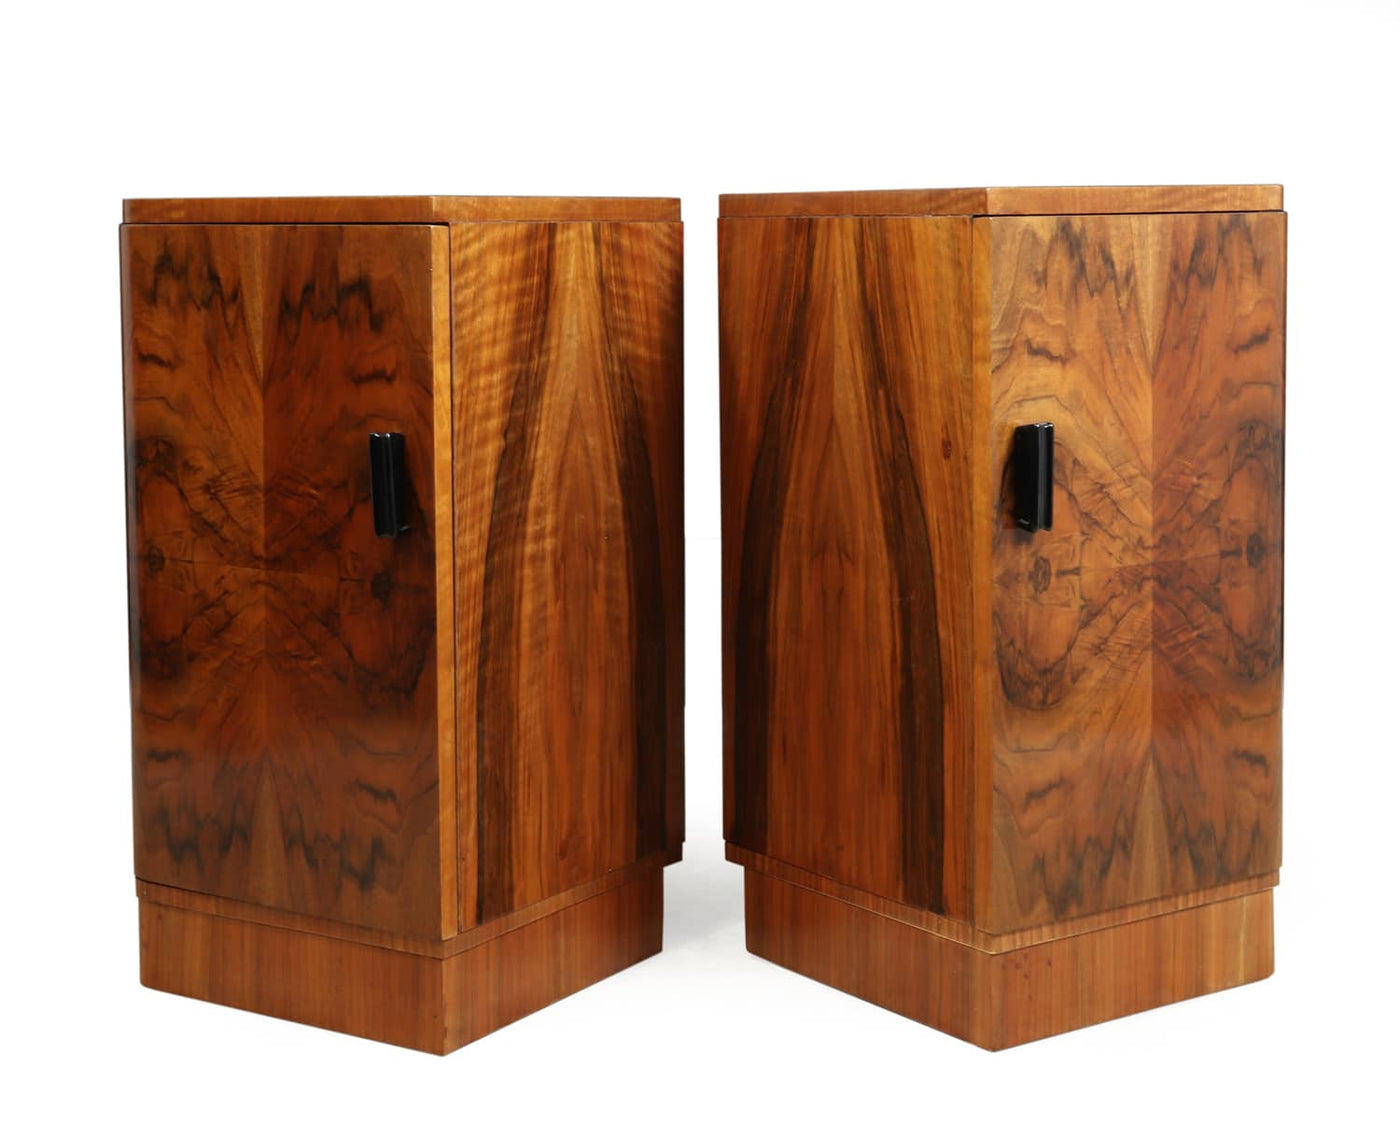 A Pair of Walnut Art Deco Bedside Cabinets